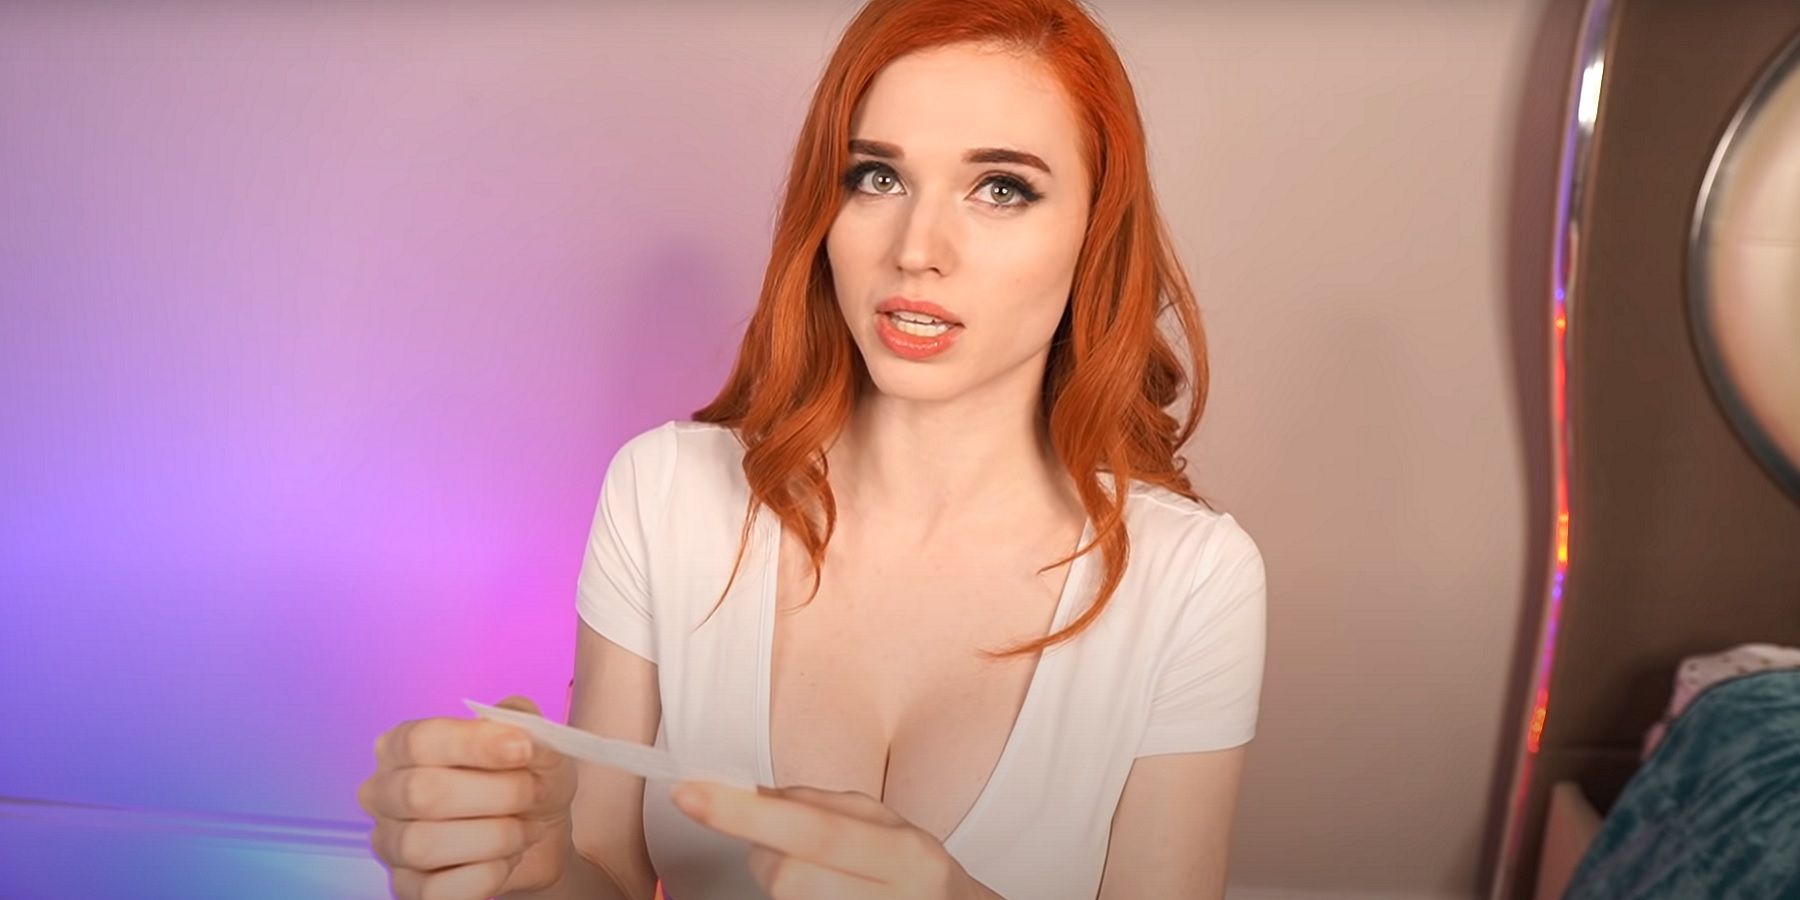 Banned amouranth not how is Amouranth has